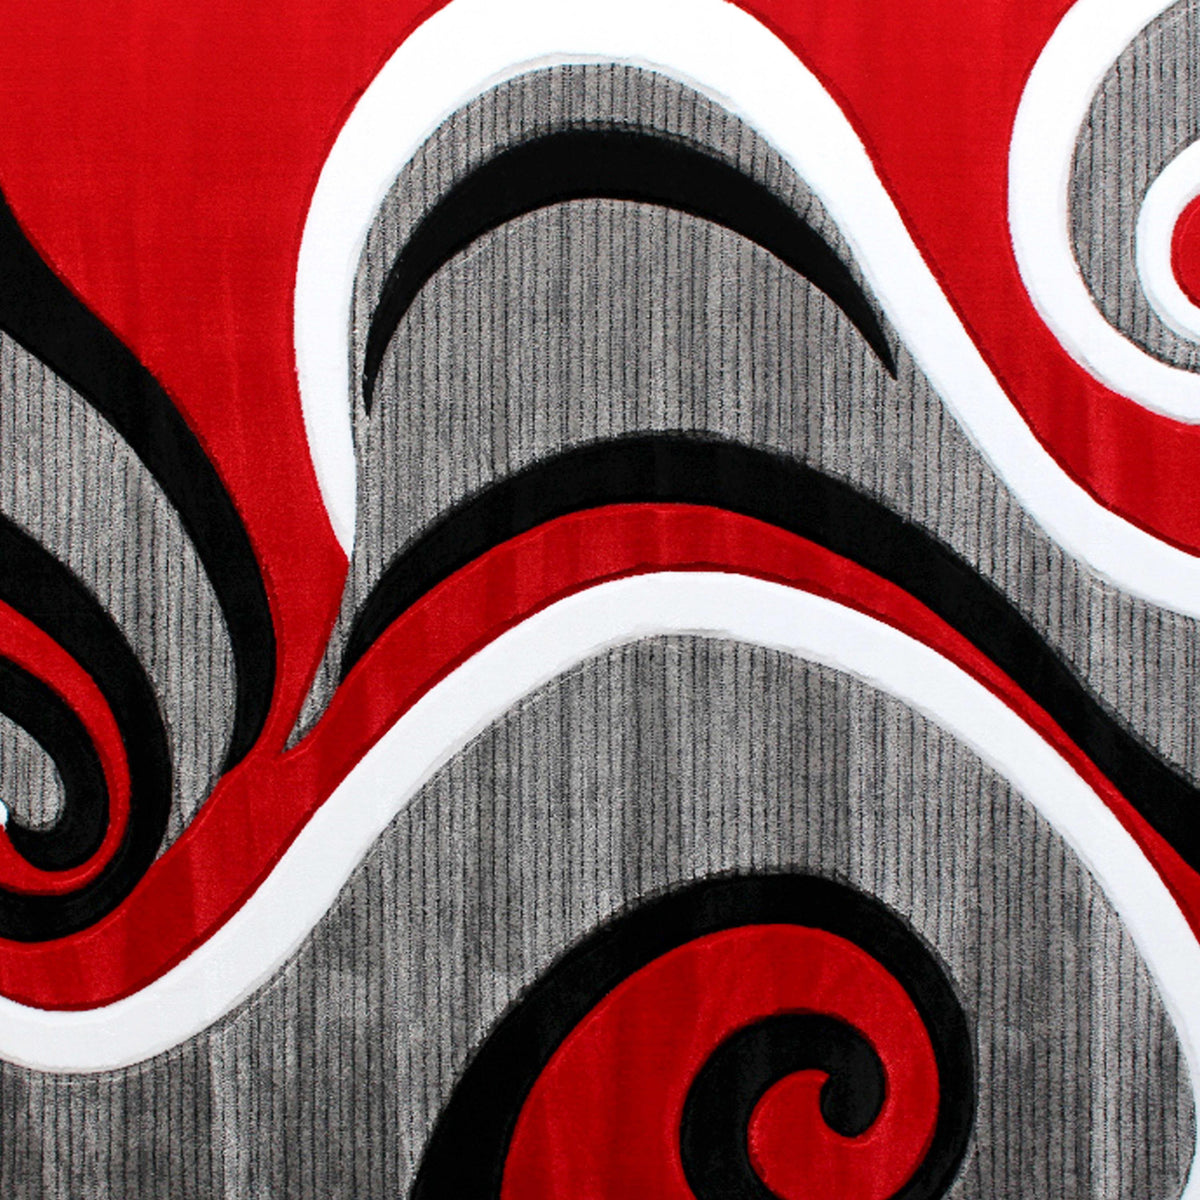 Red,5' x 7' |#| Modern High-Low Sculpted Swirl Design Abstract Area Rug - Red - 5' x 7'